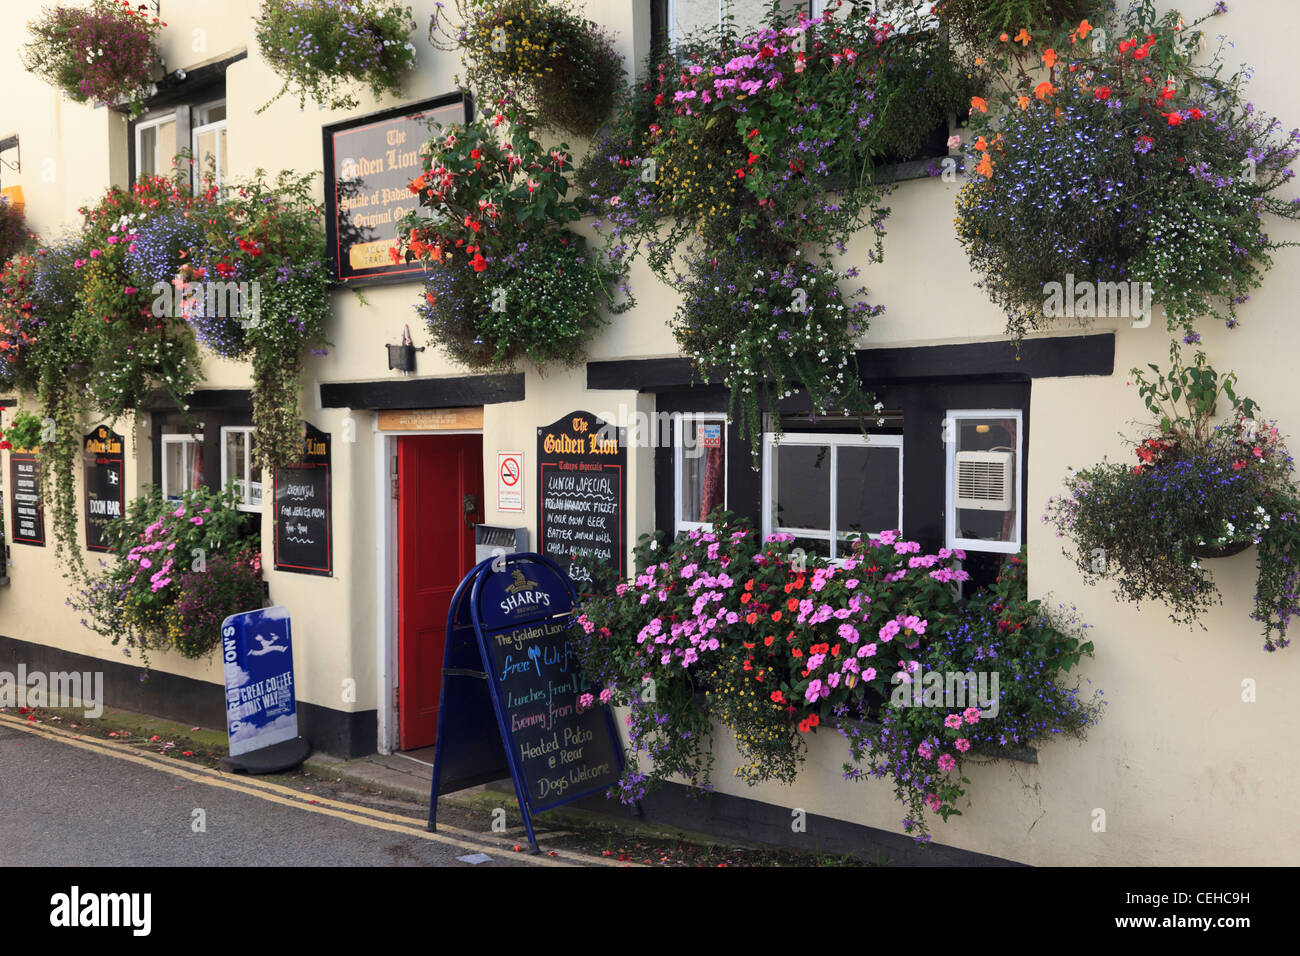 Padstow, Cornwall, England, UK. The Golden Lion pub front with flowers in hanging baskets and flower planters Stock Photo